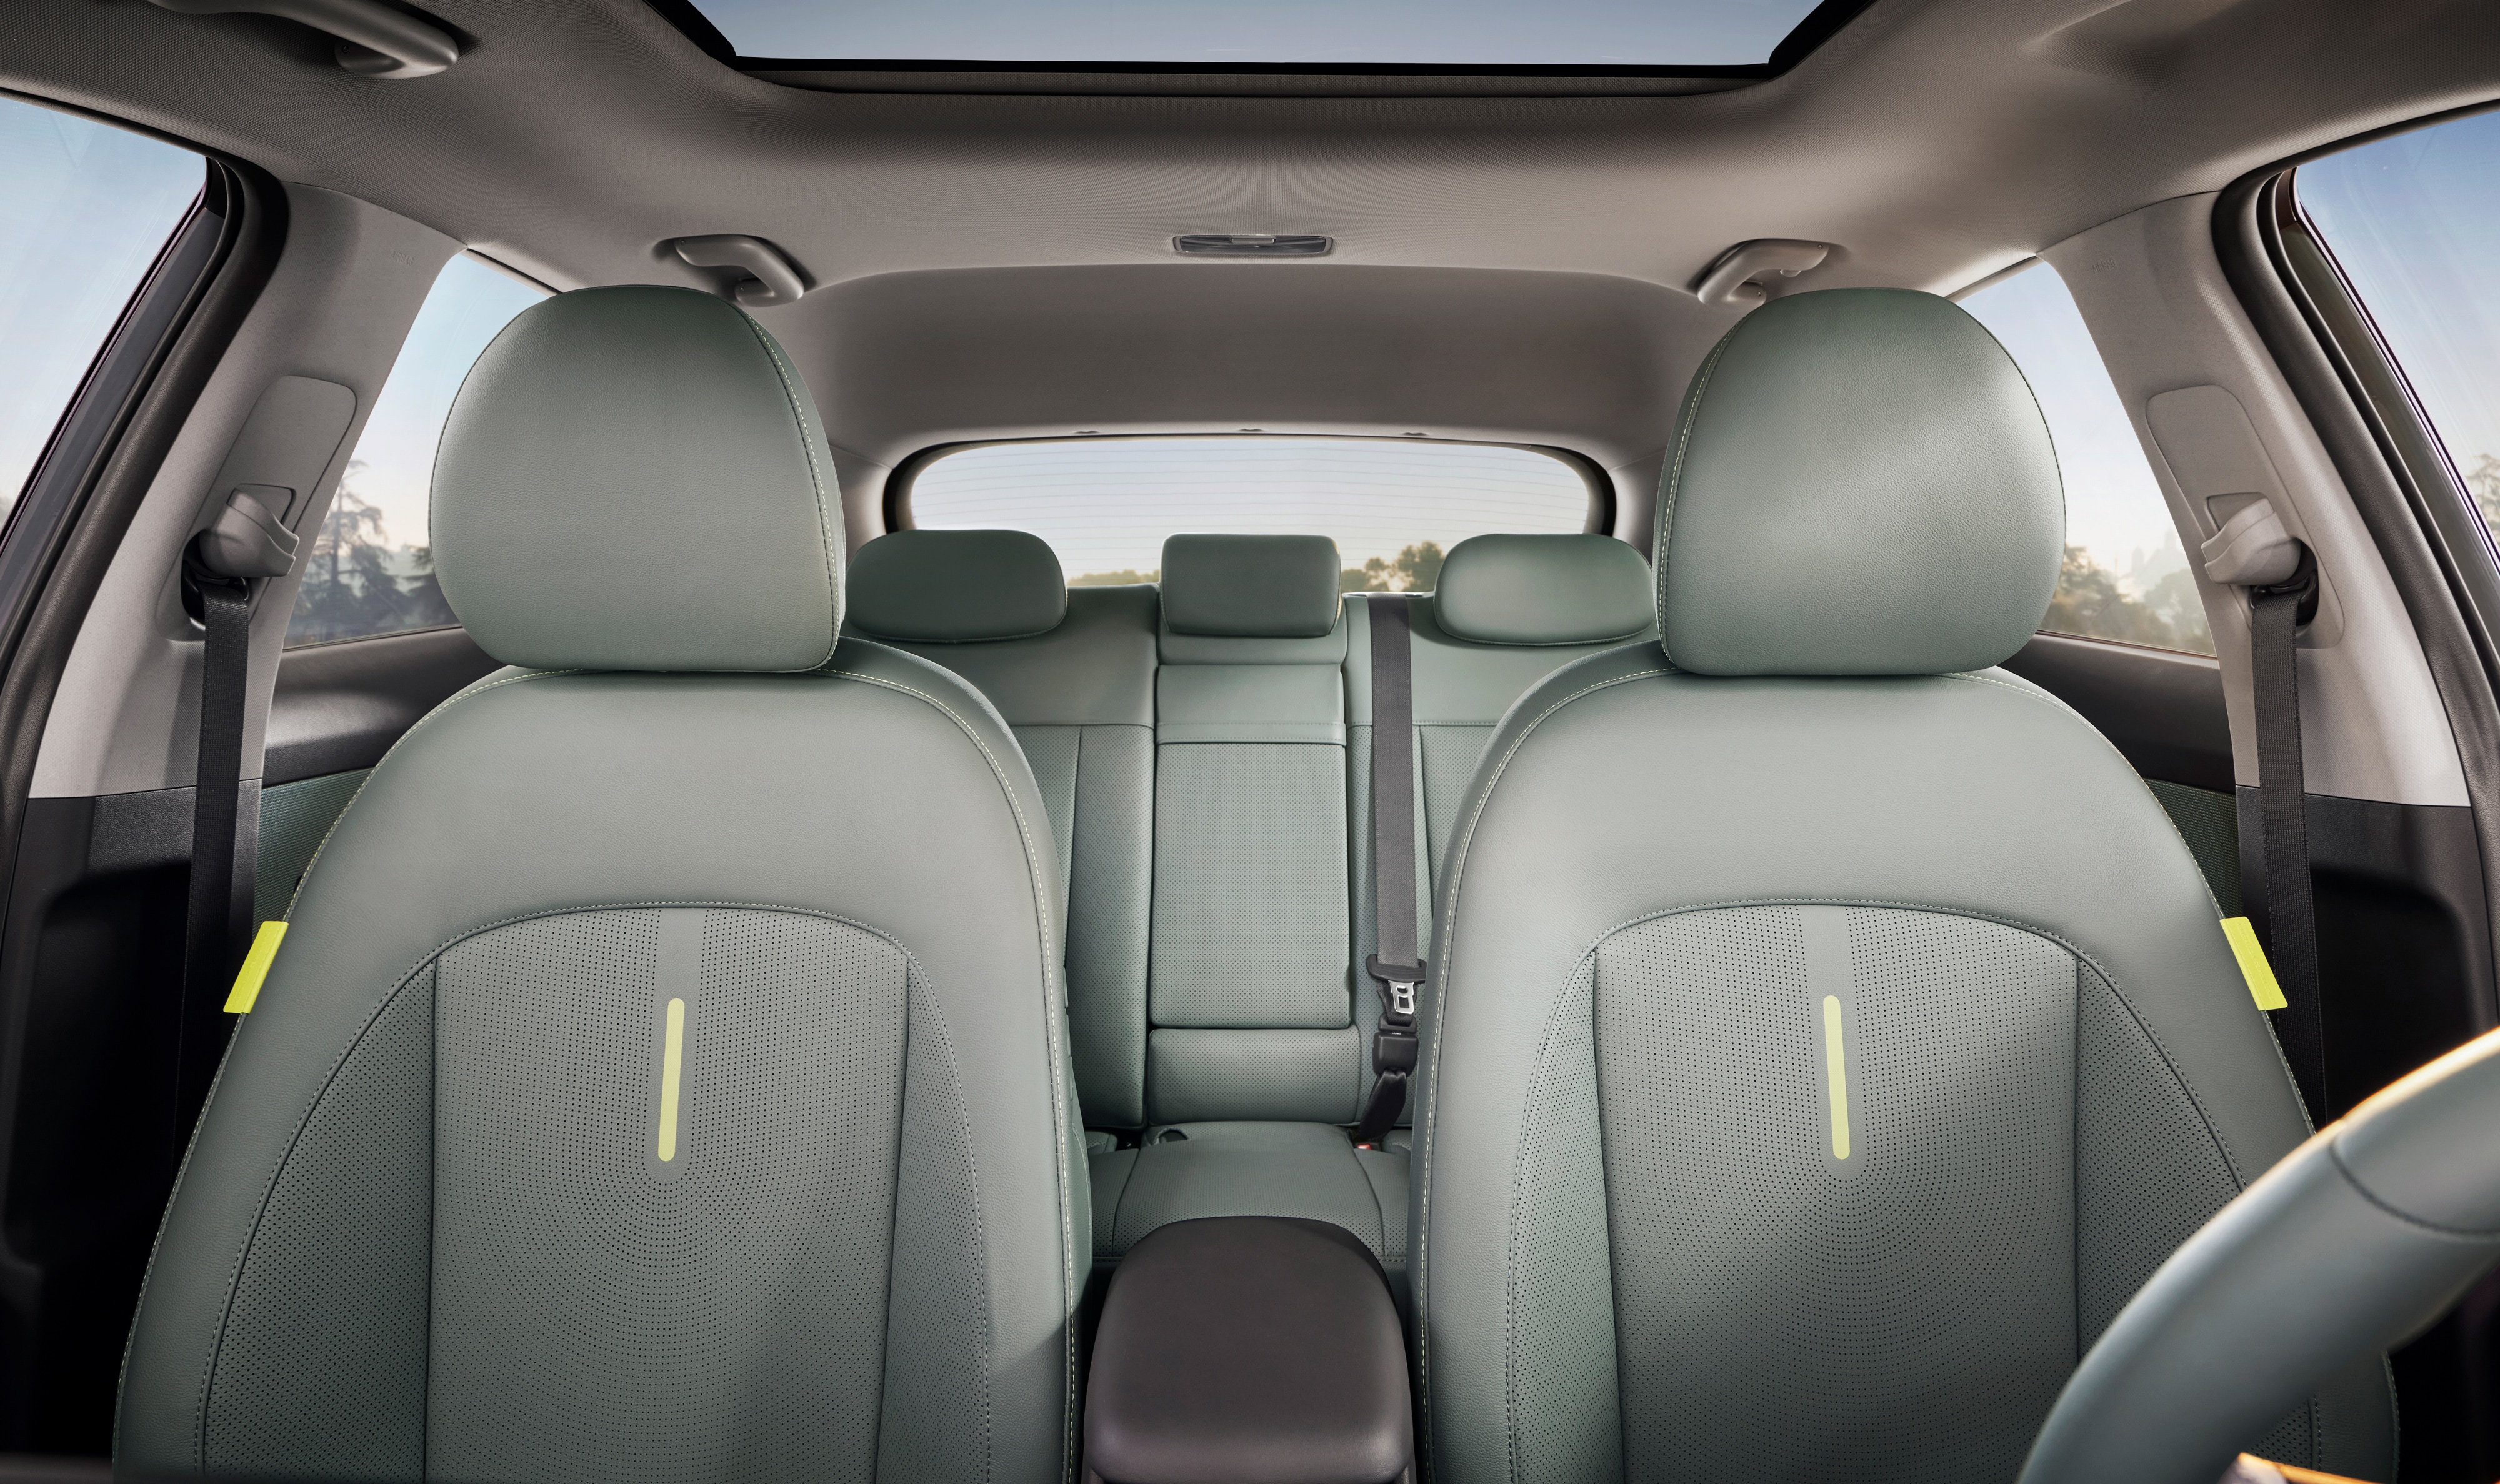 Inside view of the Hyundai KONA SUV with its heated and ventilated seats.